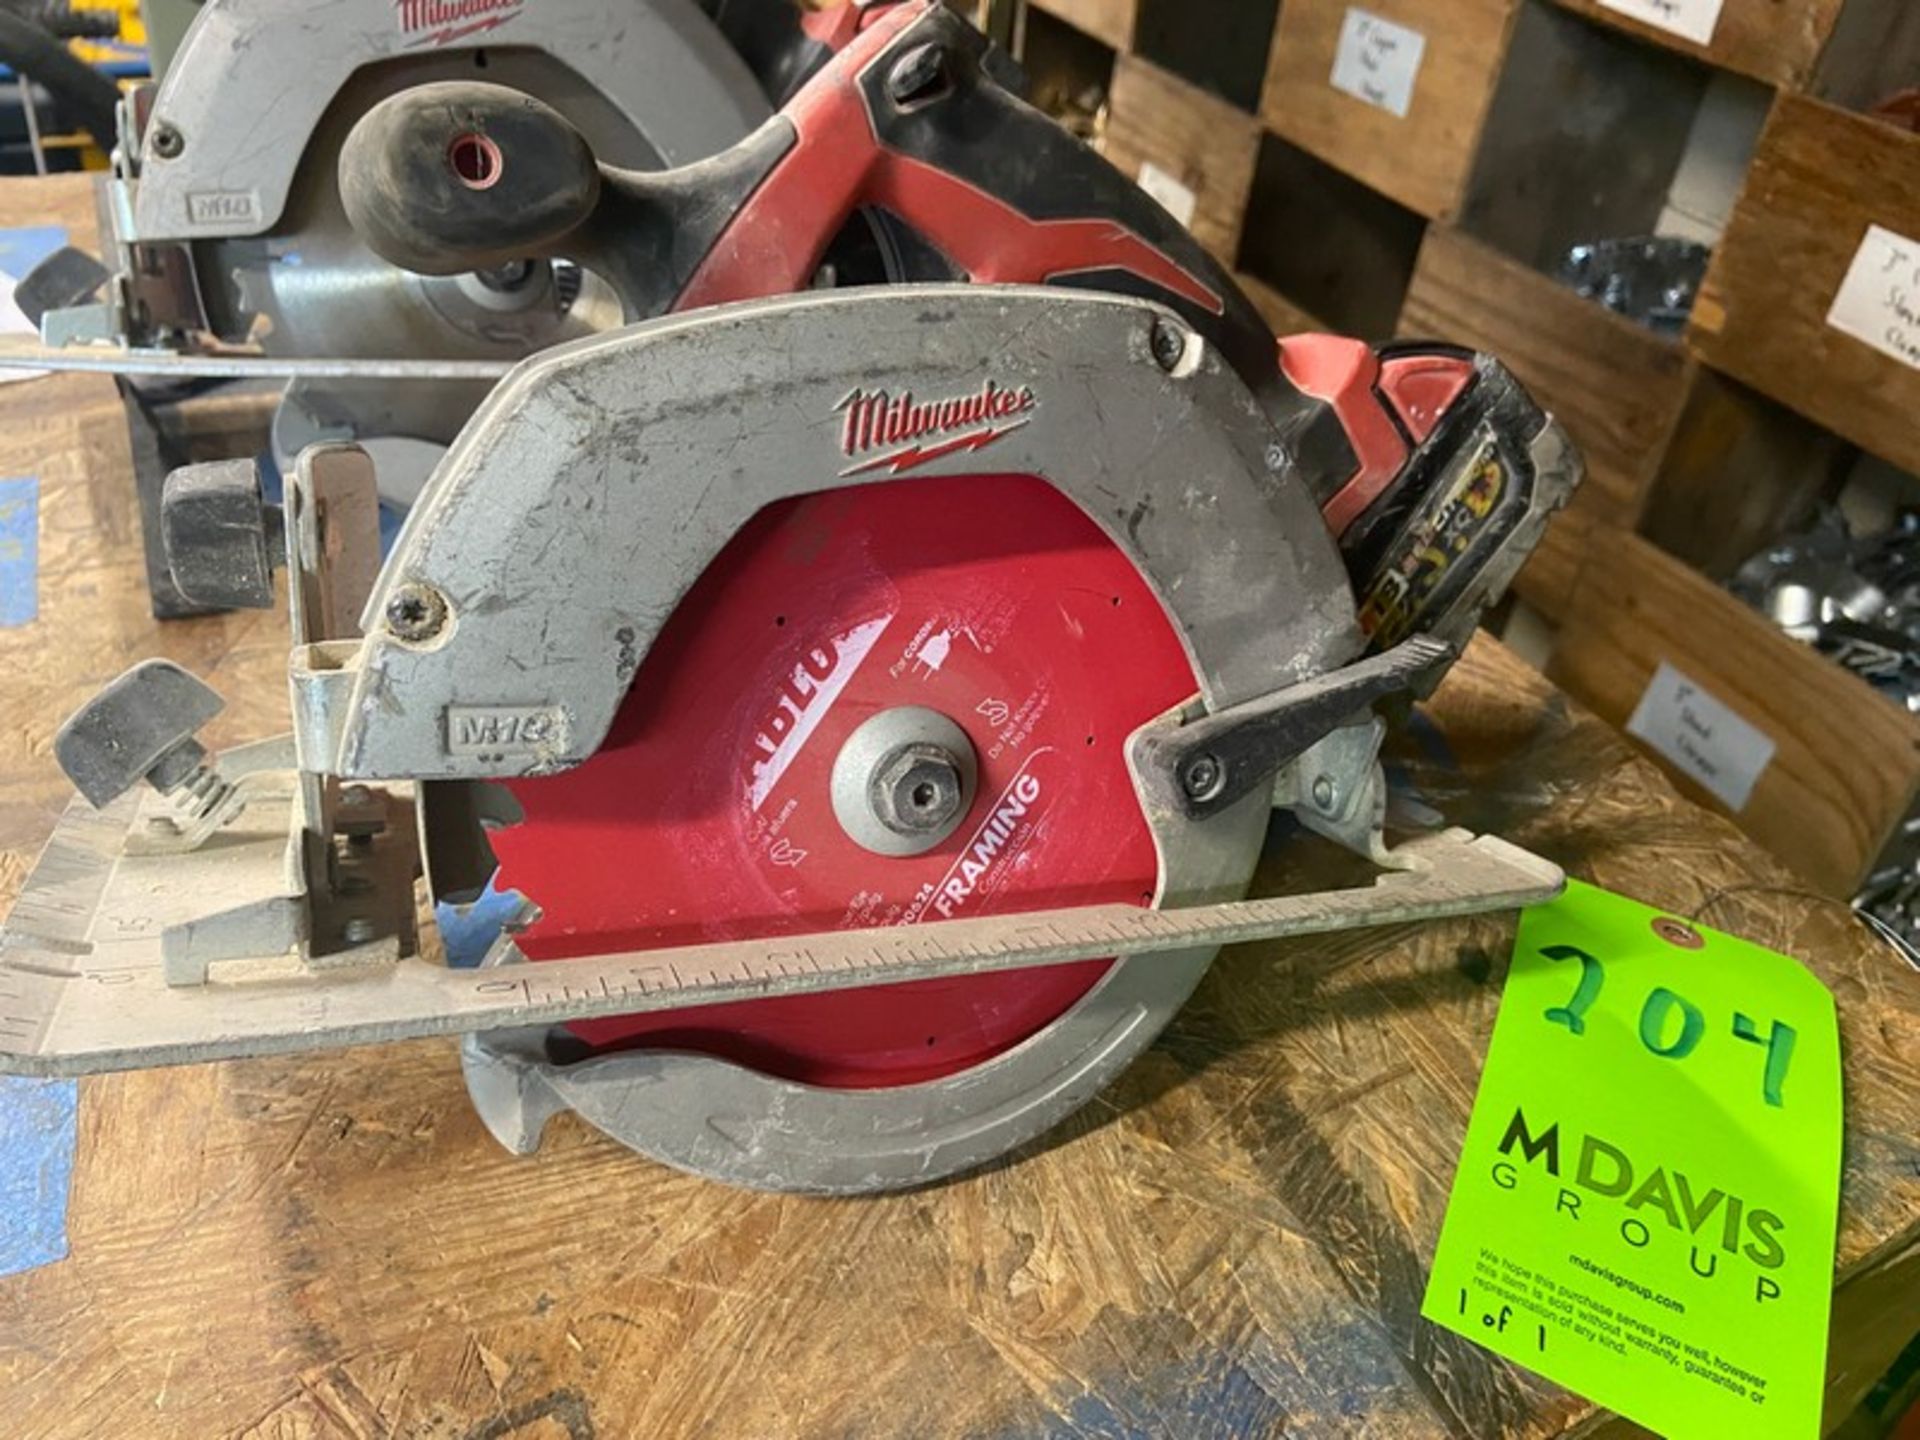 Milwaukee 6-1/2” Circular Saw, with M18 RedLithium XC 5.0 Battery (LOCATED IN MONROEVILLE, PA) - Image 11 of 12